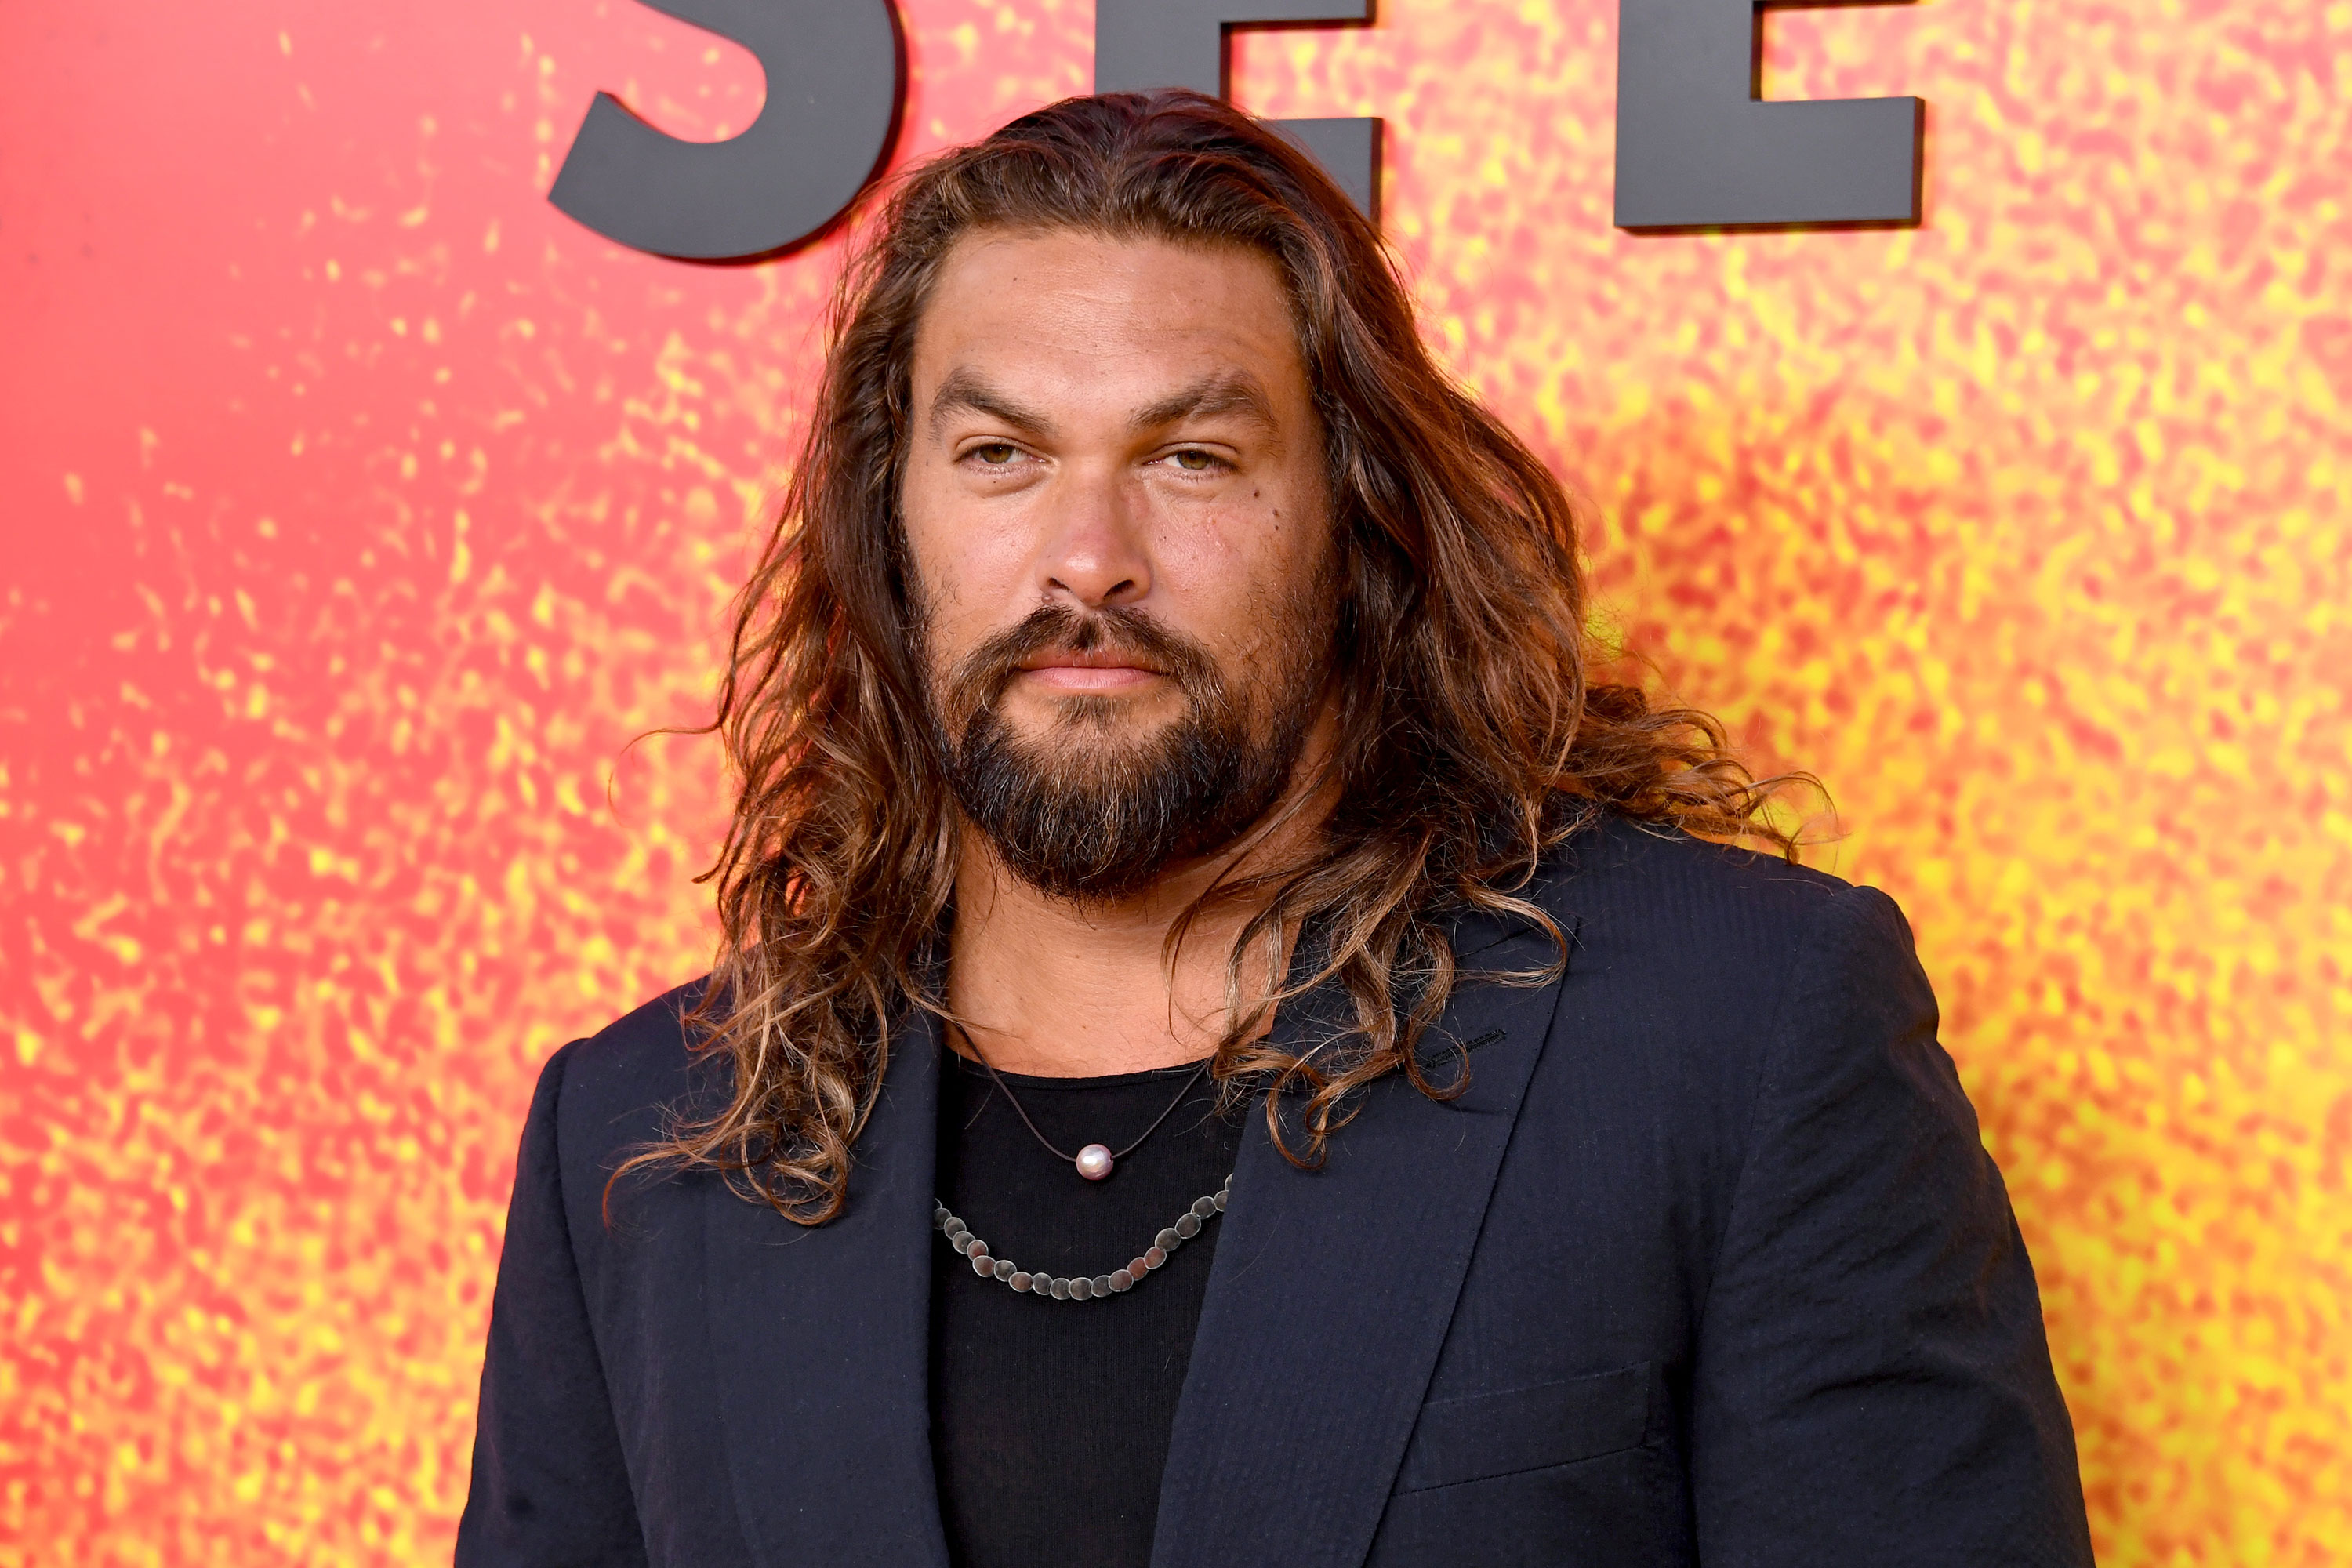 Jason Momoa poses for photos in Los Angeles in August 2022.